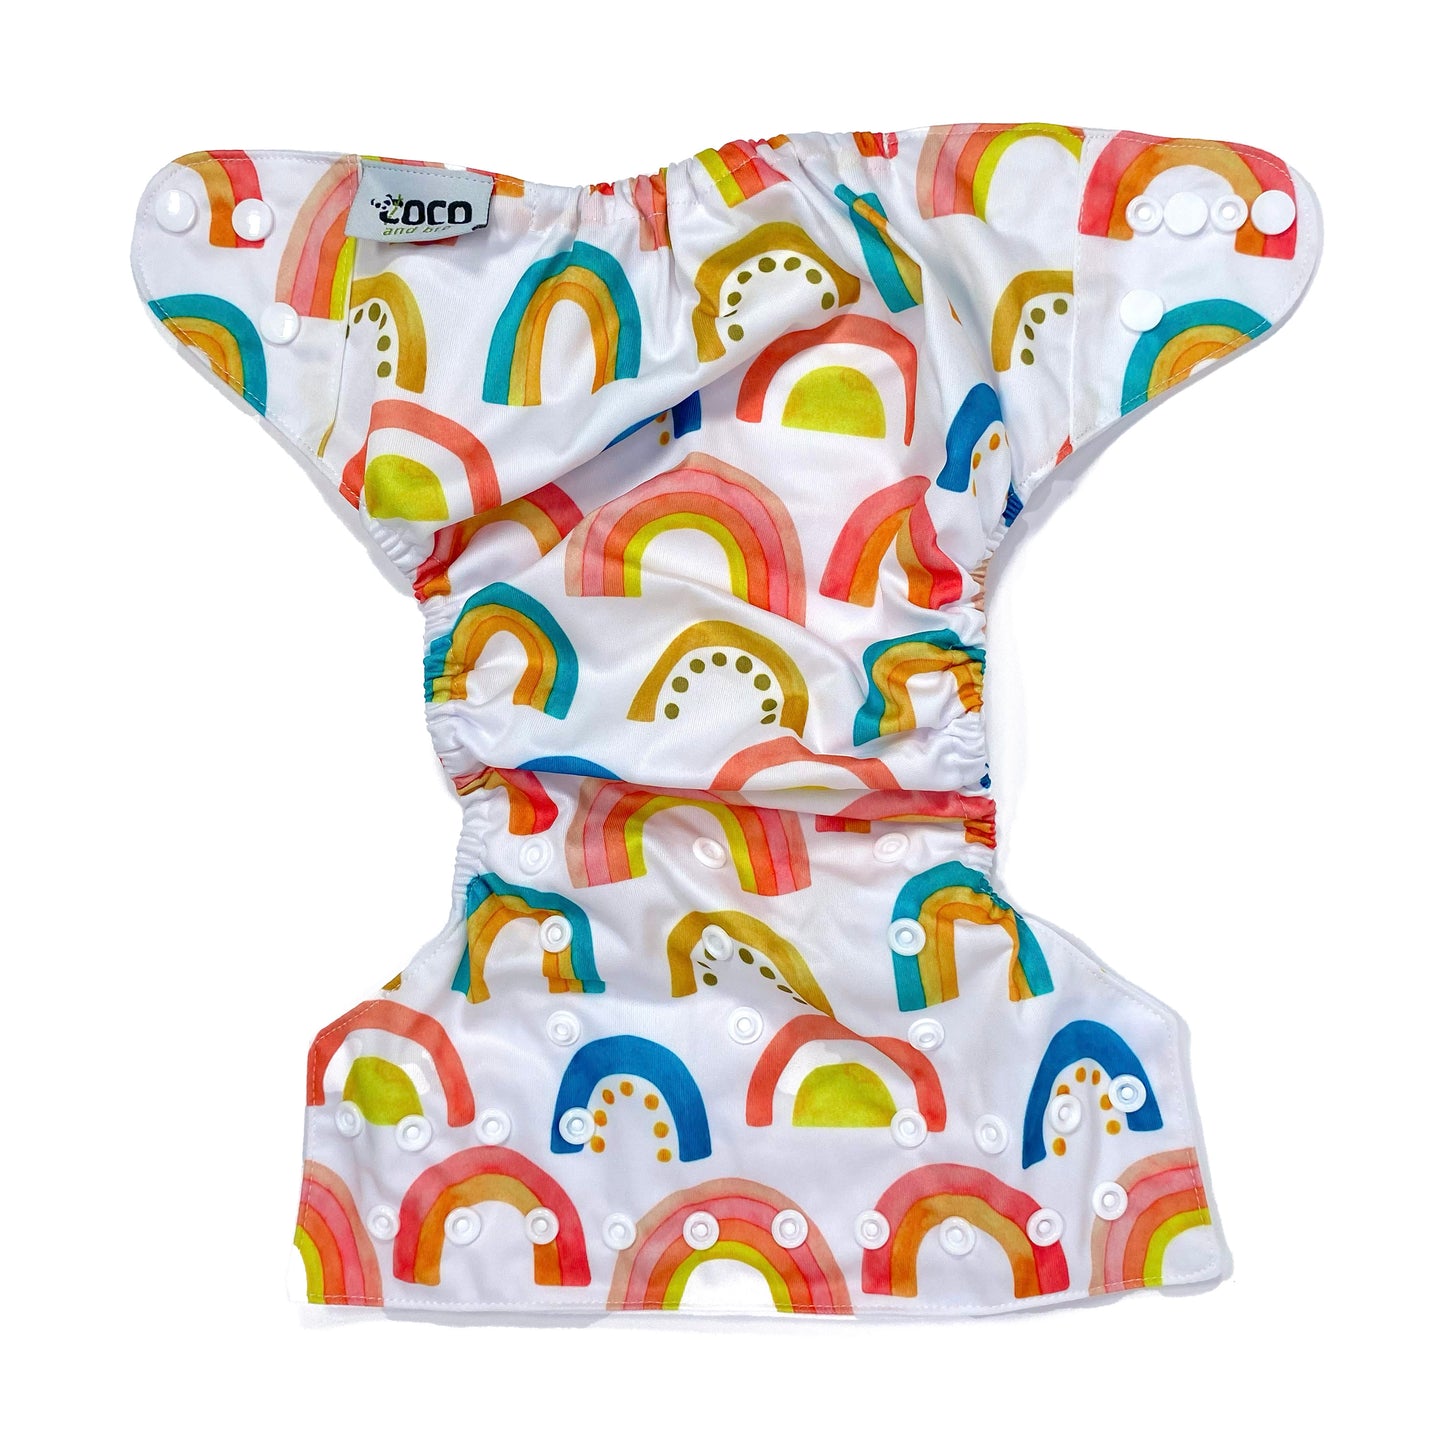 An adjustable reusable nappy for babies and toddlers, featuring a bright rainbow design, with brightly coloured rainbows on a white background. View shows the full outside pattern of the nappy, with fastenings open.